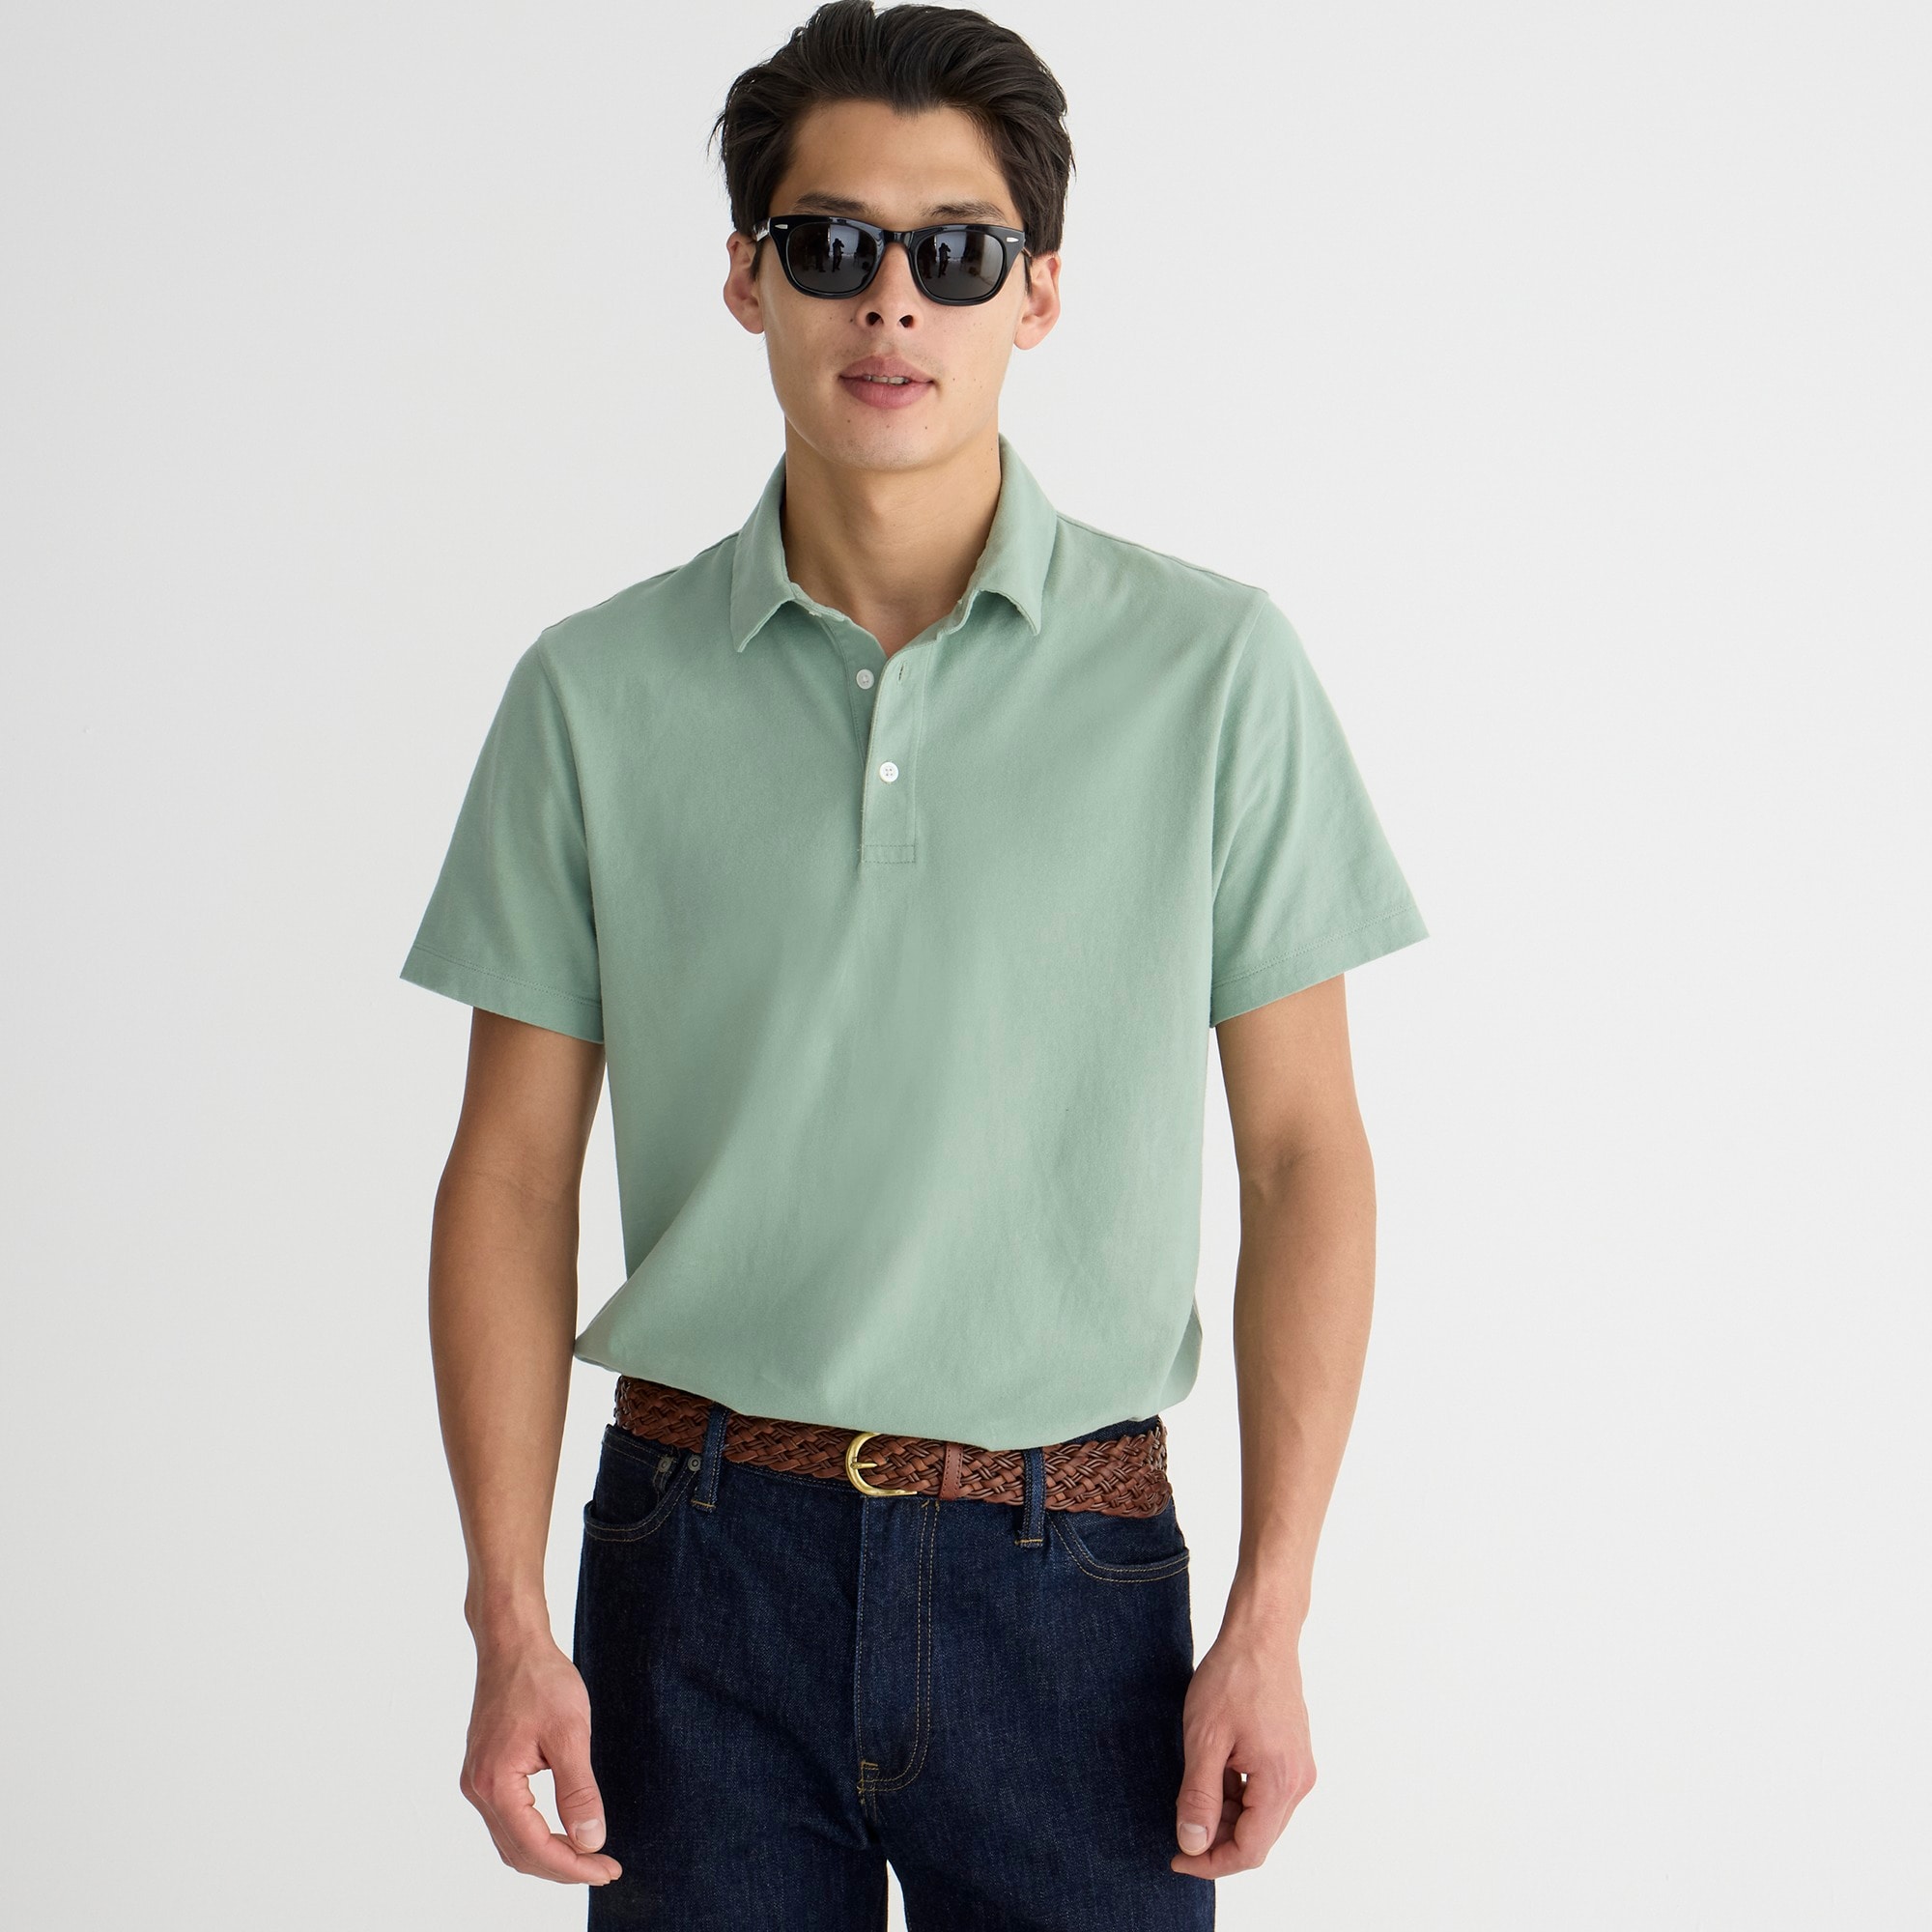  Slim sueded cotton polo shirt